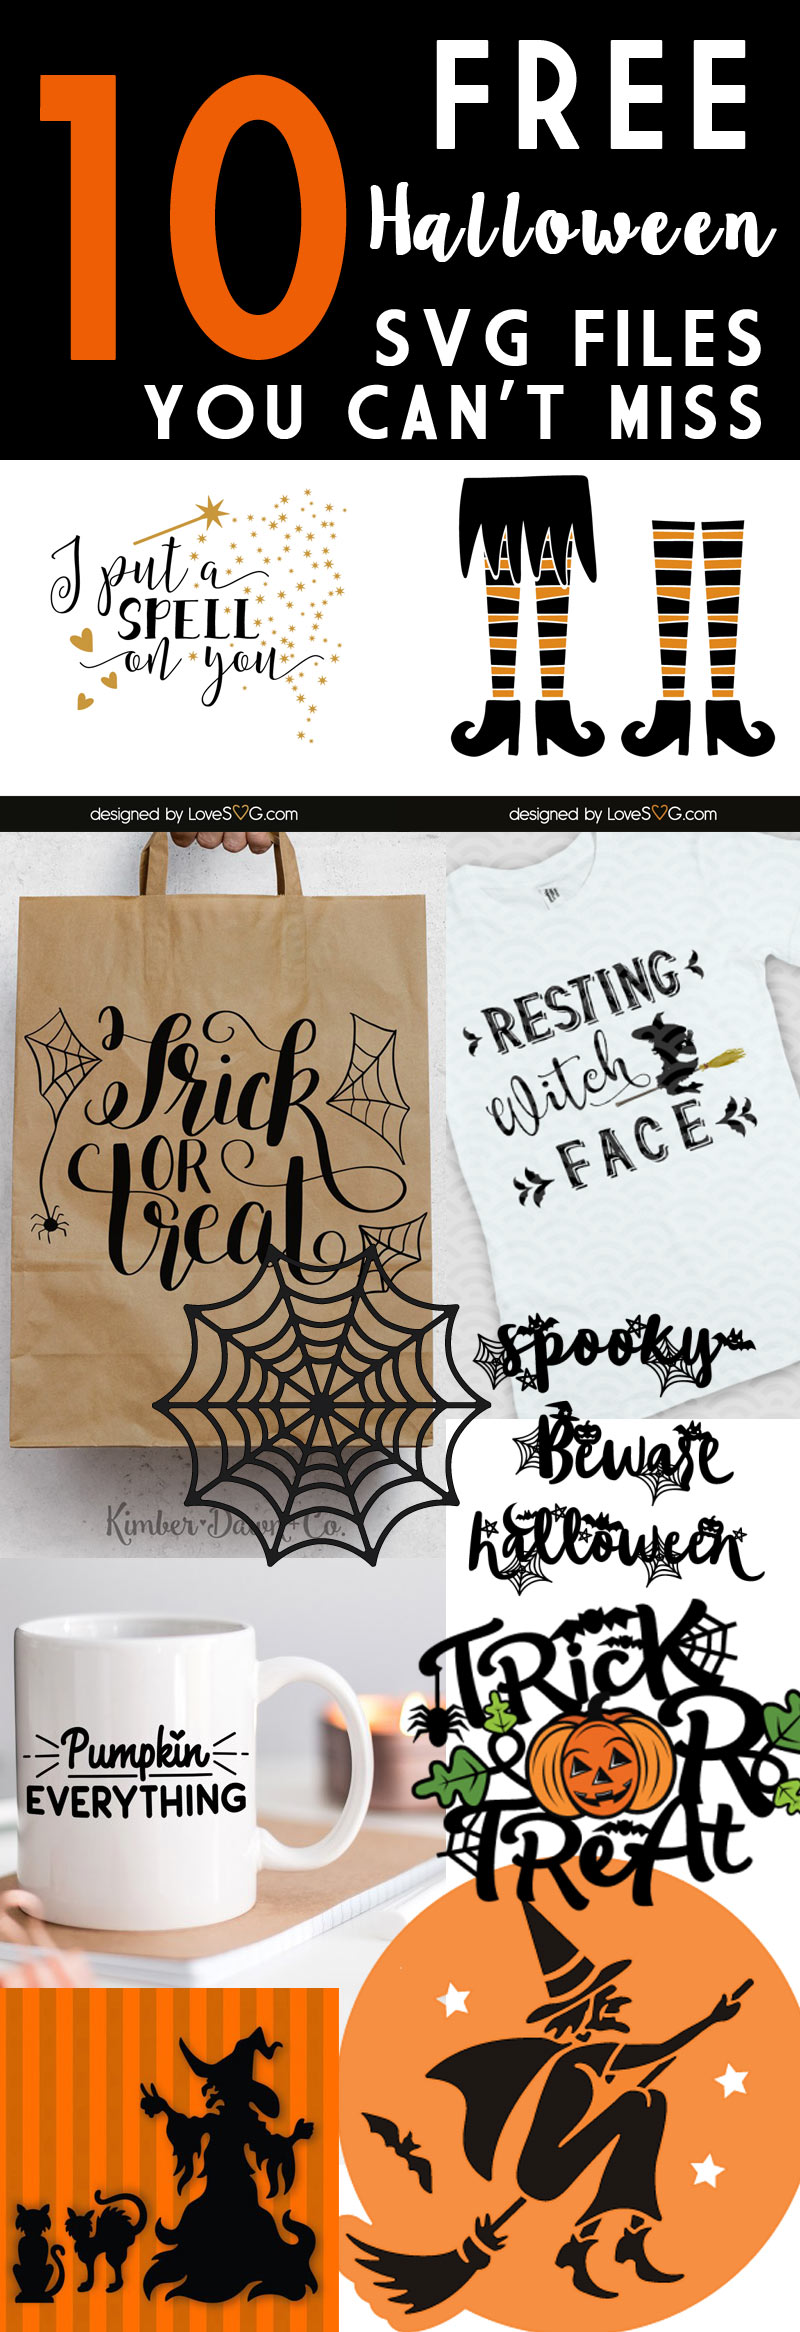 10 free halloween SVG files you can't miss